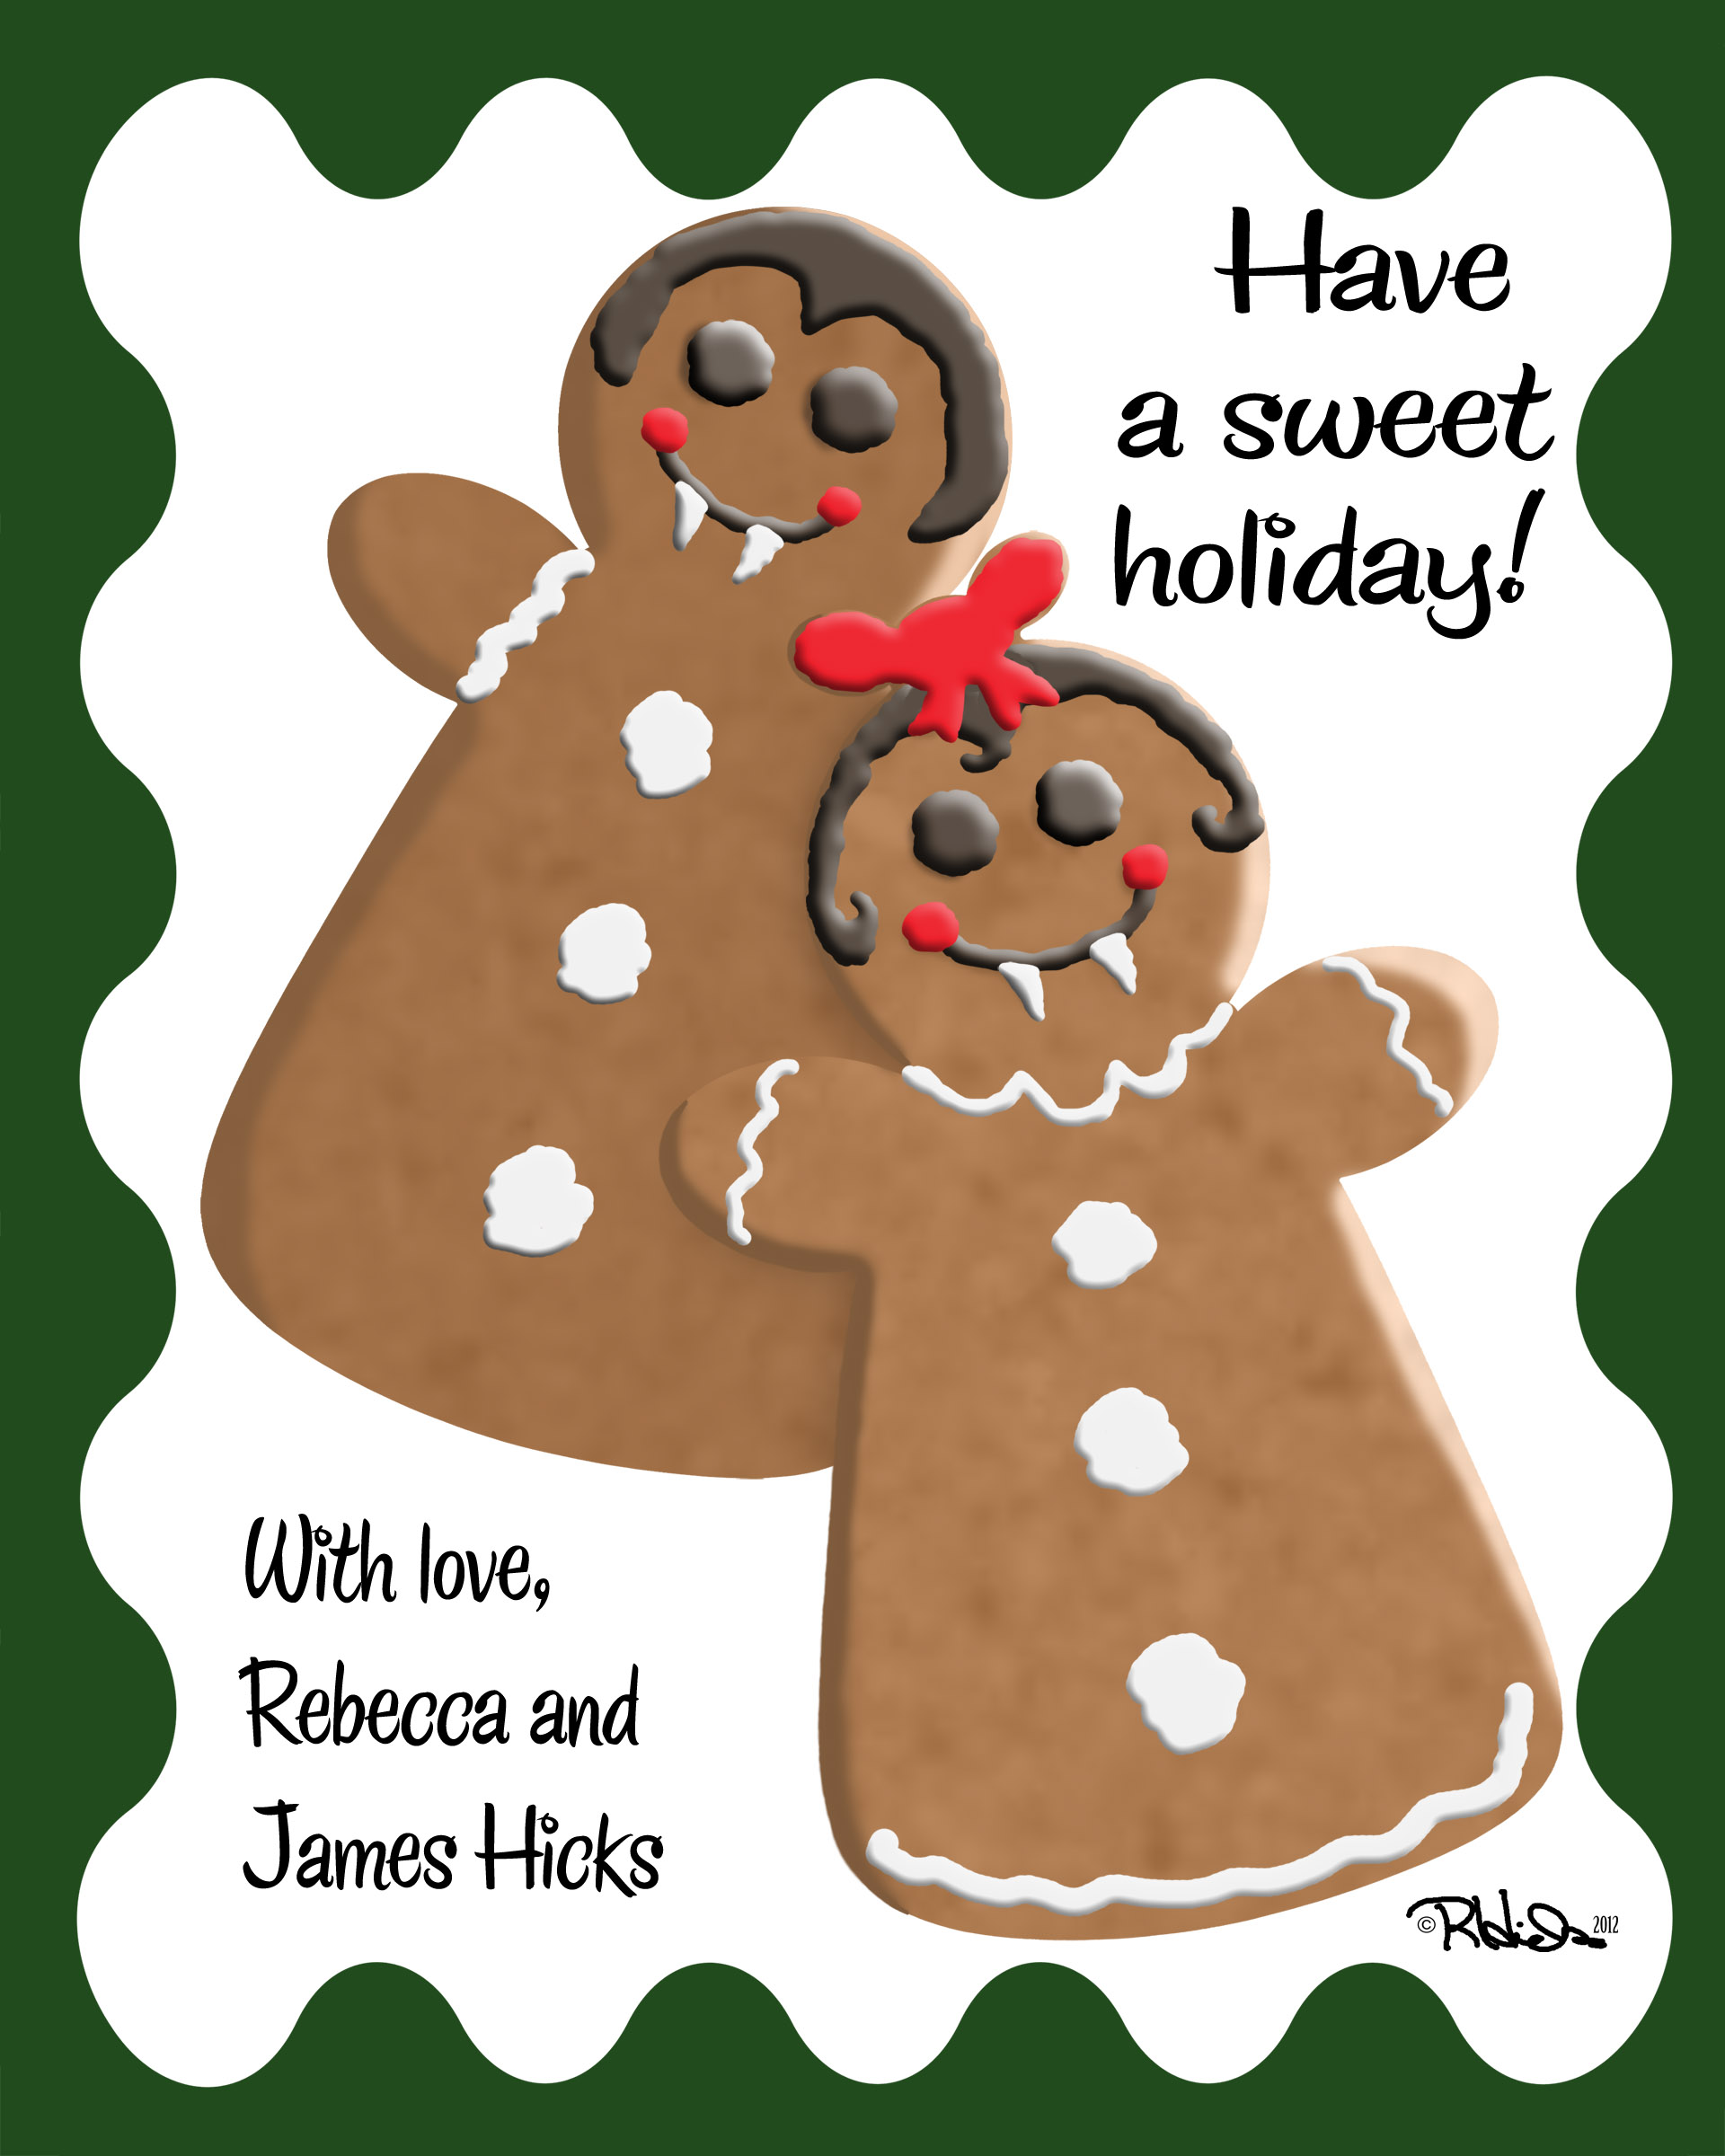 Holiday card image featuring two Little Vampire gingerbread people and captioned “Have a sweet holiday! With love, Rebecca and James Hicks